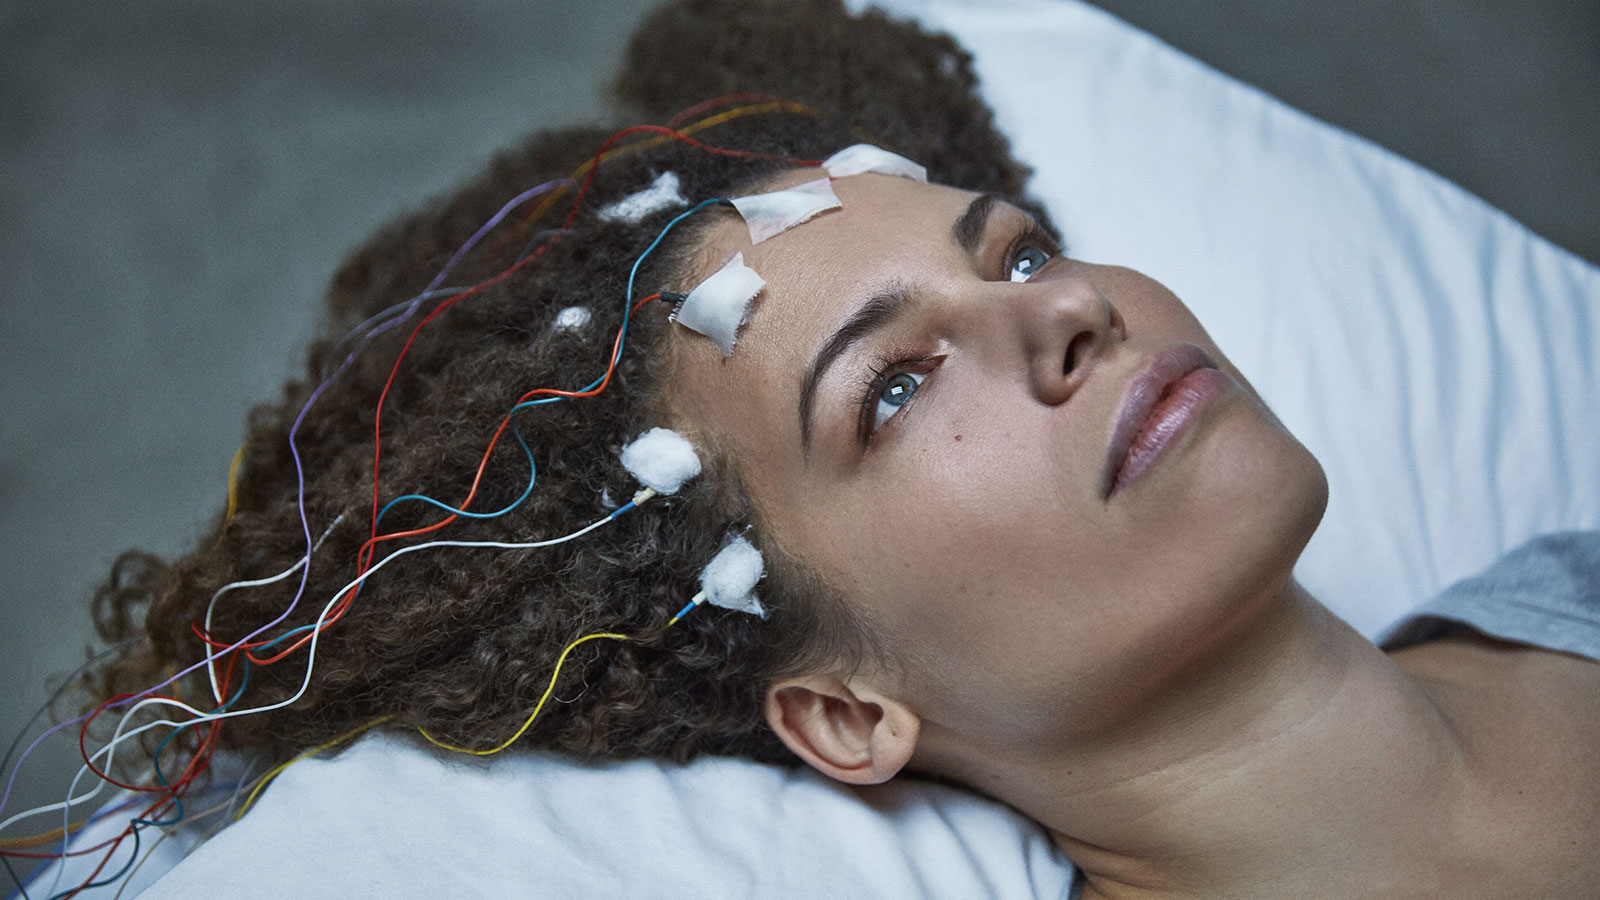 Jennifer Brea is laying on a pillow with probes taped to her forehead and her hairline.